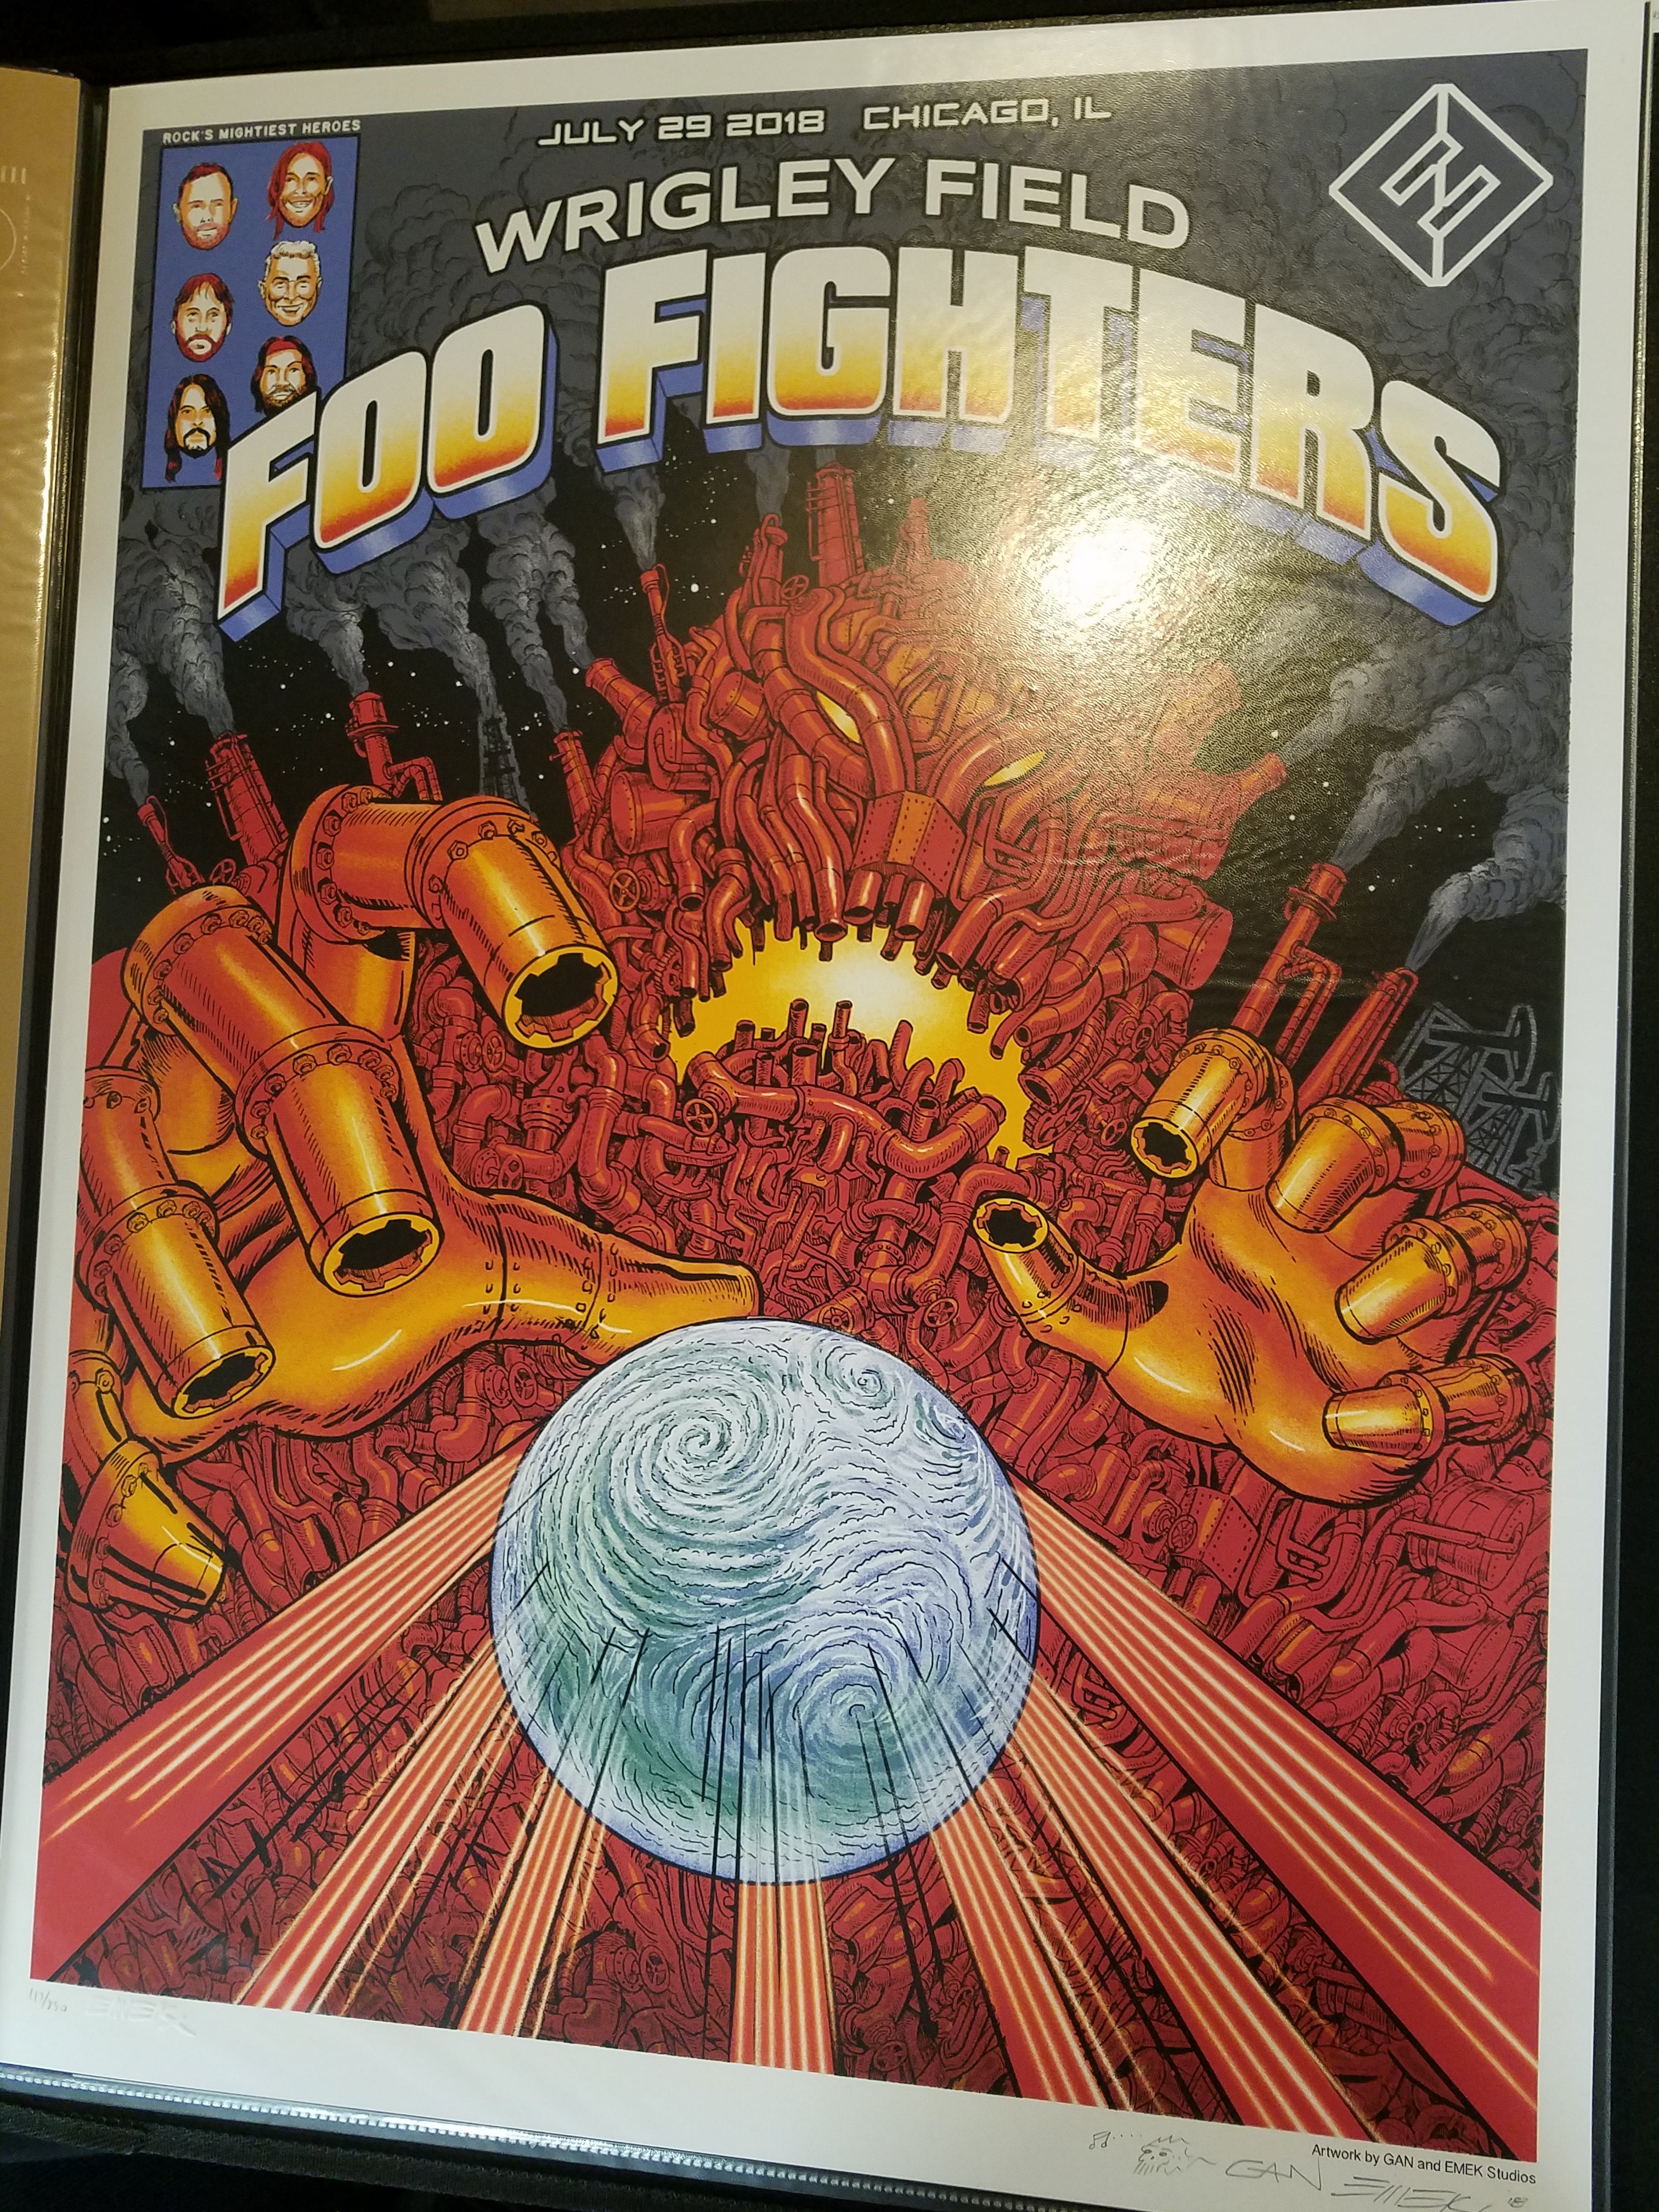 Title:  Foo Fighters Emek Wrigley Field July 29th, 2018  Artist:  Emek and his brother 'Gan'  Edition:  xx/850  Size:  18" x 24"  Venue:  Wrigley Field  Location:  Chicago, IL  Notes:   Signed by both artists.  750 prints were originally sold at the show. embossed and doodled.  This print is edition #100 or lower.  This poster is a collaboration with Emek's brother 'Gan' for the Foo Fighters show which took place at Wrigley Field in Chicago, IL on July 29, 2018.